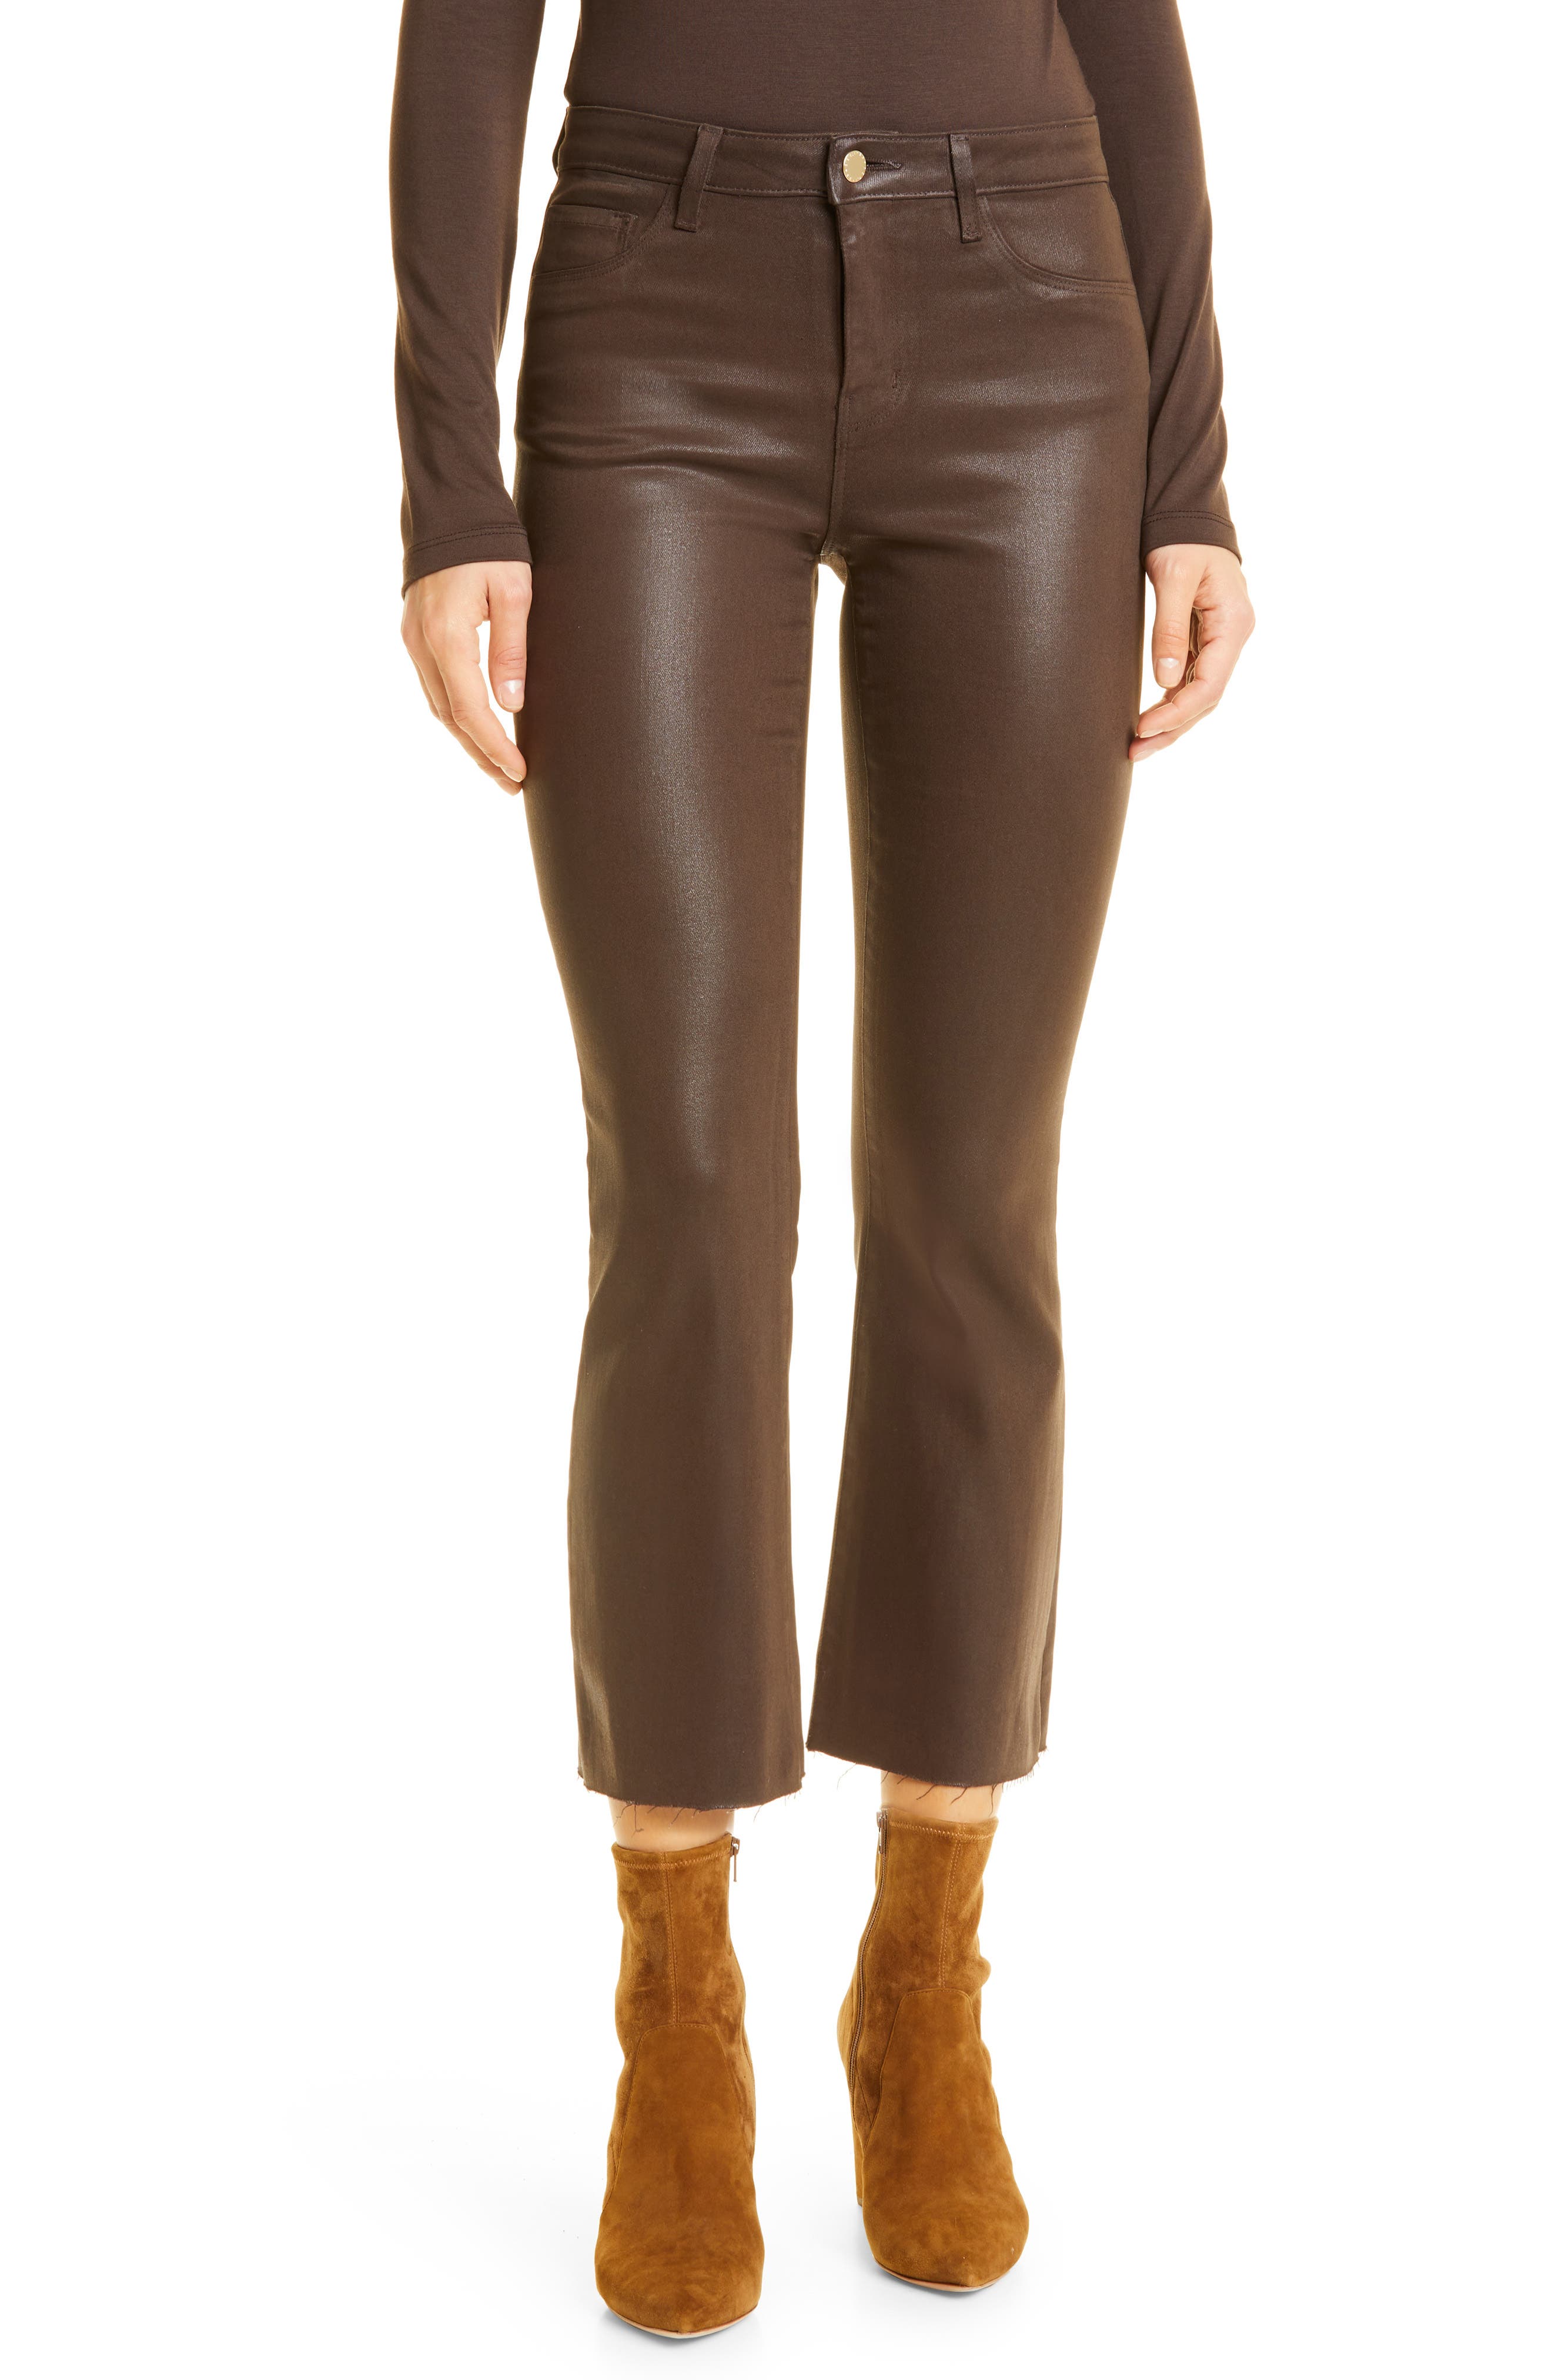 L'AGENCE Kendra Coated High Waist Crop Flare Jeans in Espresso Coated